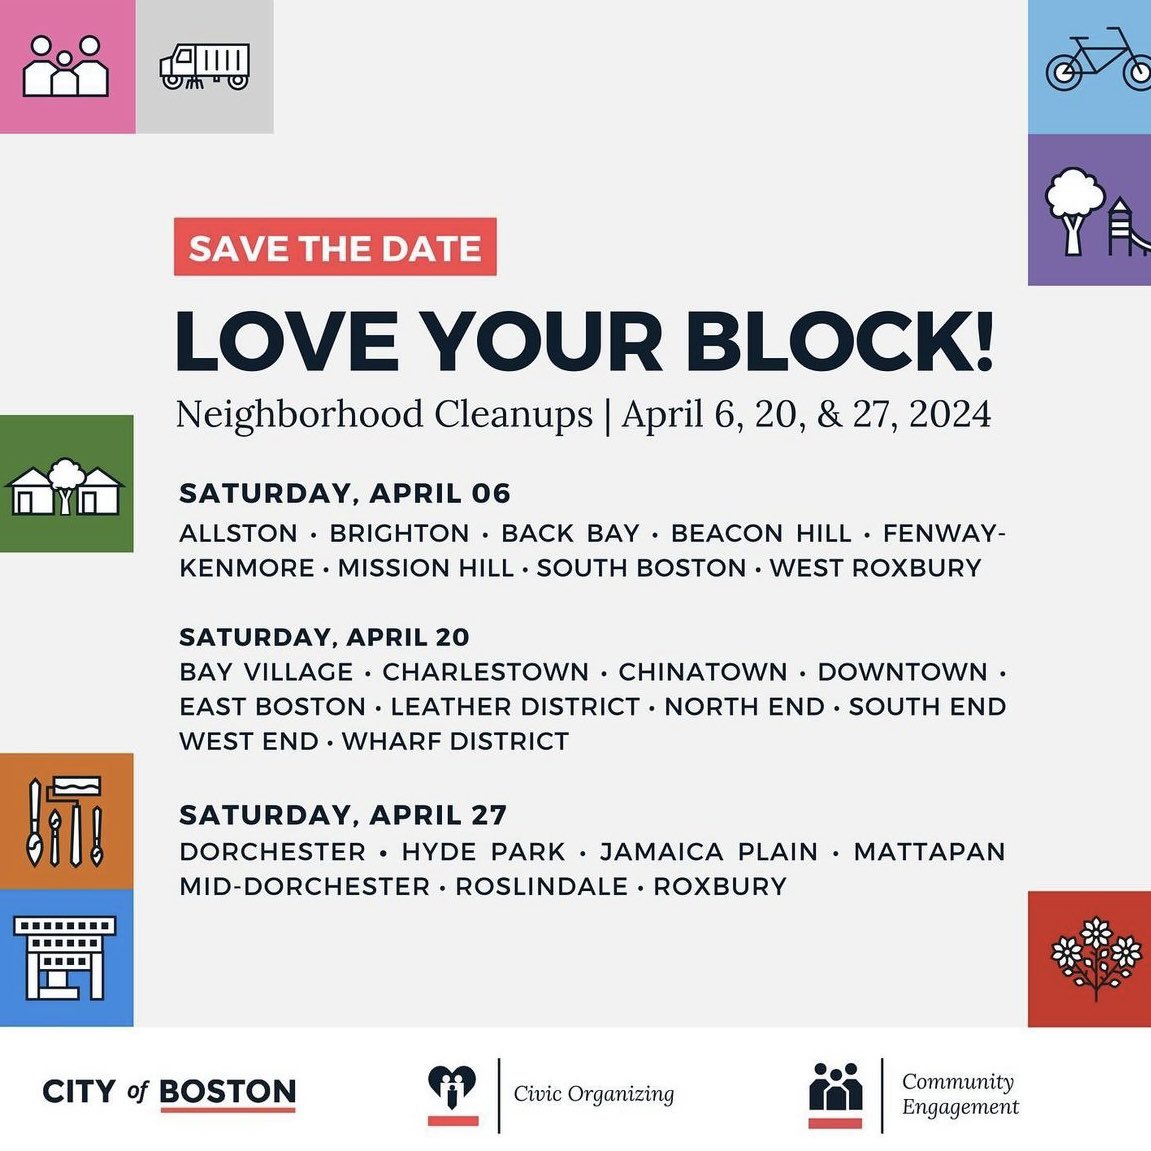 Neighborhood clean ups begin this weekend! Help clean up the aftermath yesterday’s gusty winds. #loveyourblock